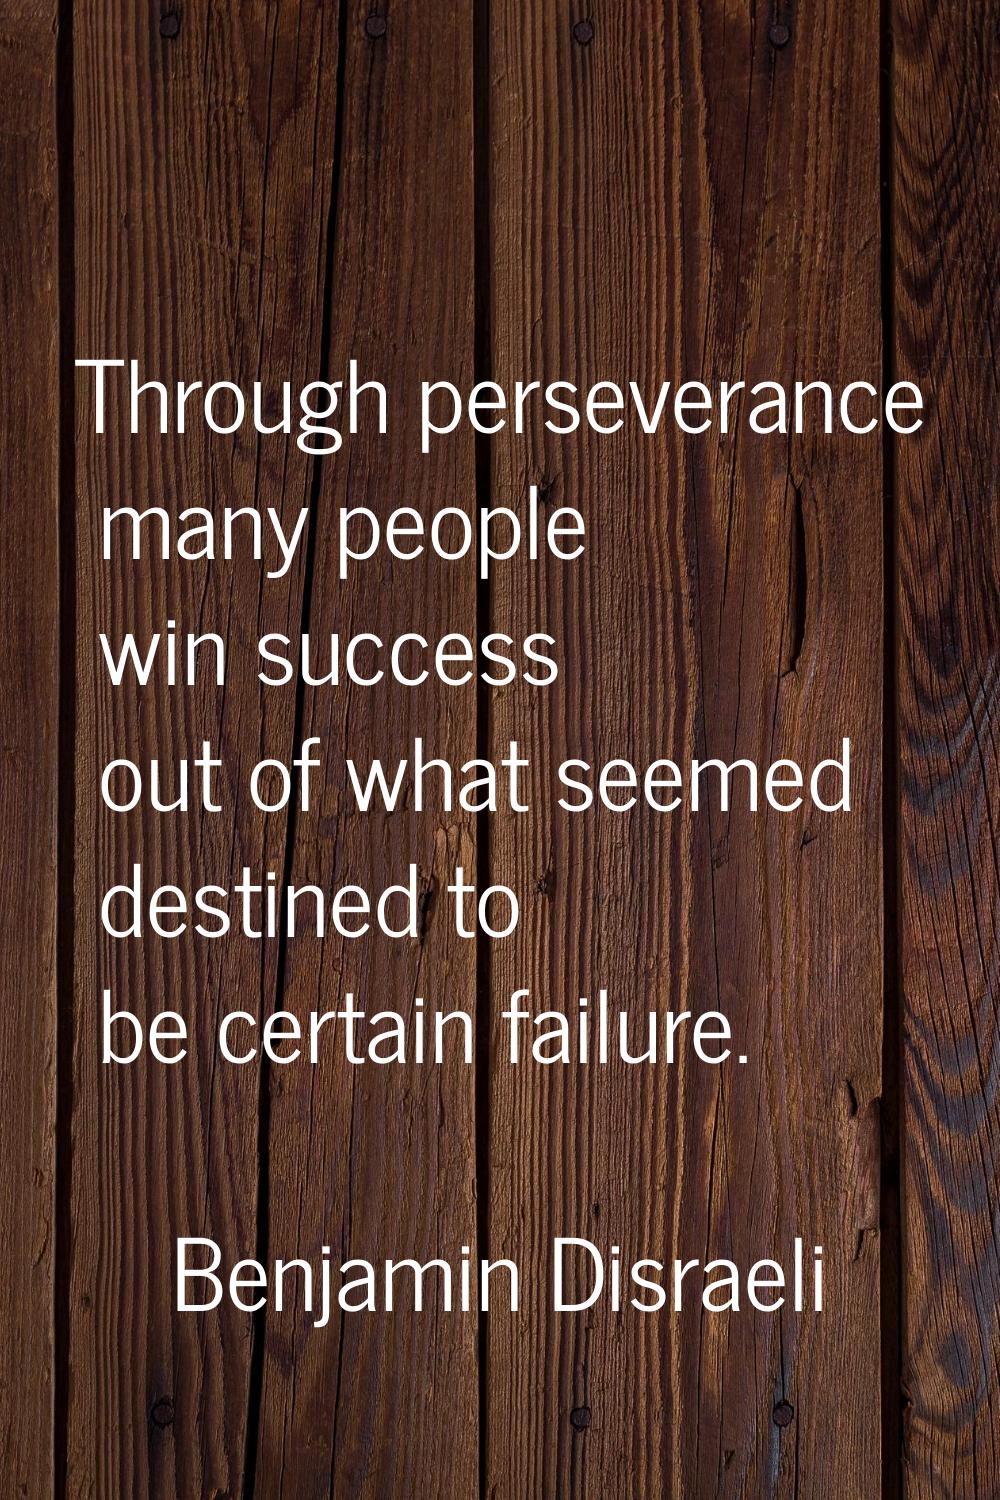 Through perseverance many people win success out of what seemed destined to be certain failure.